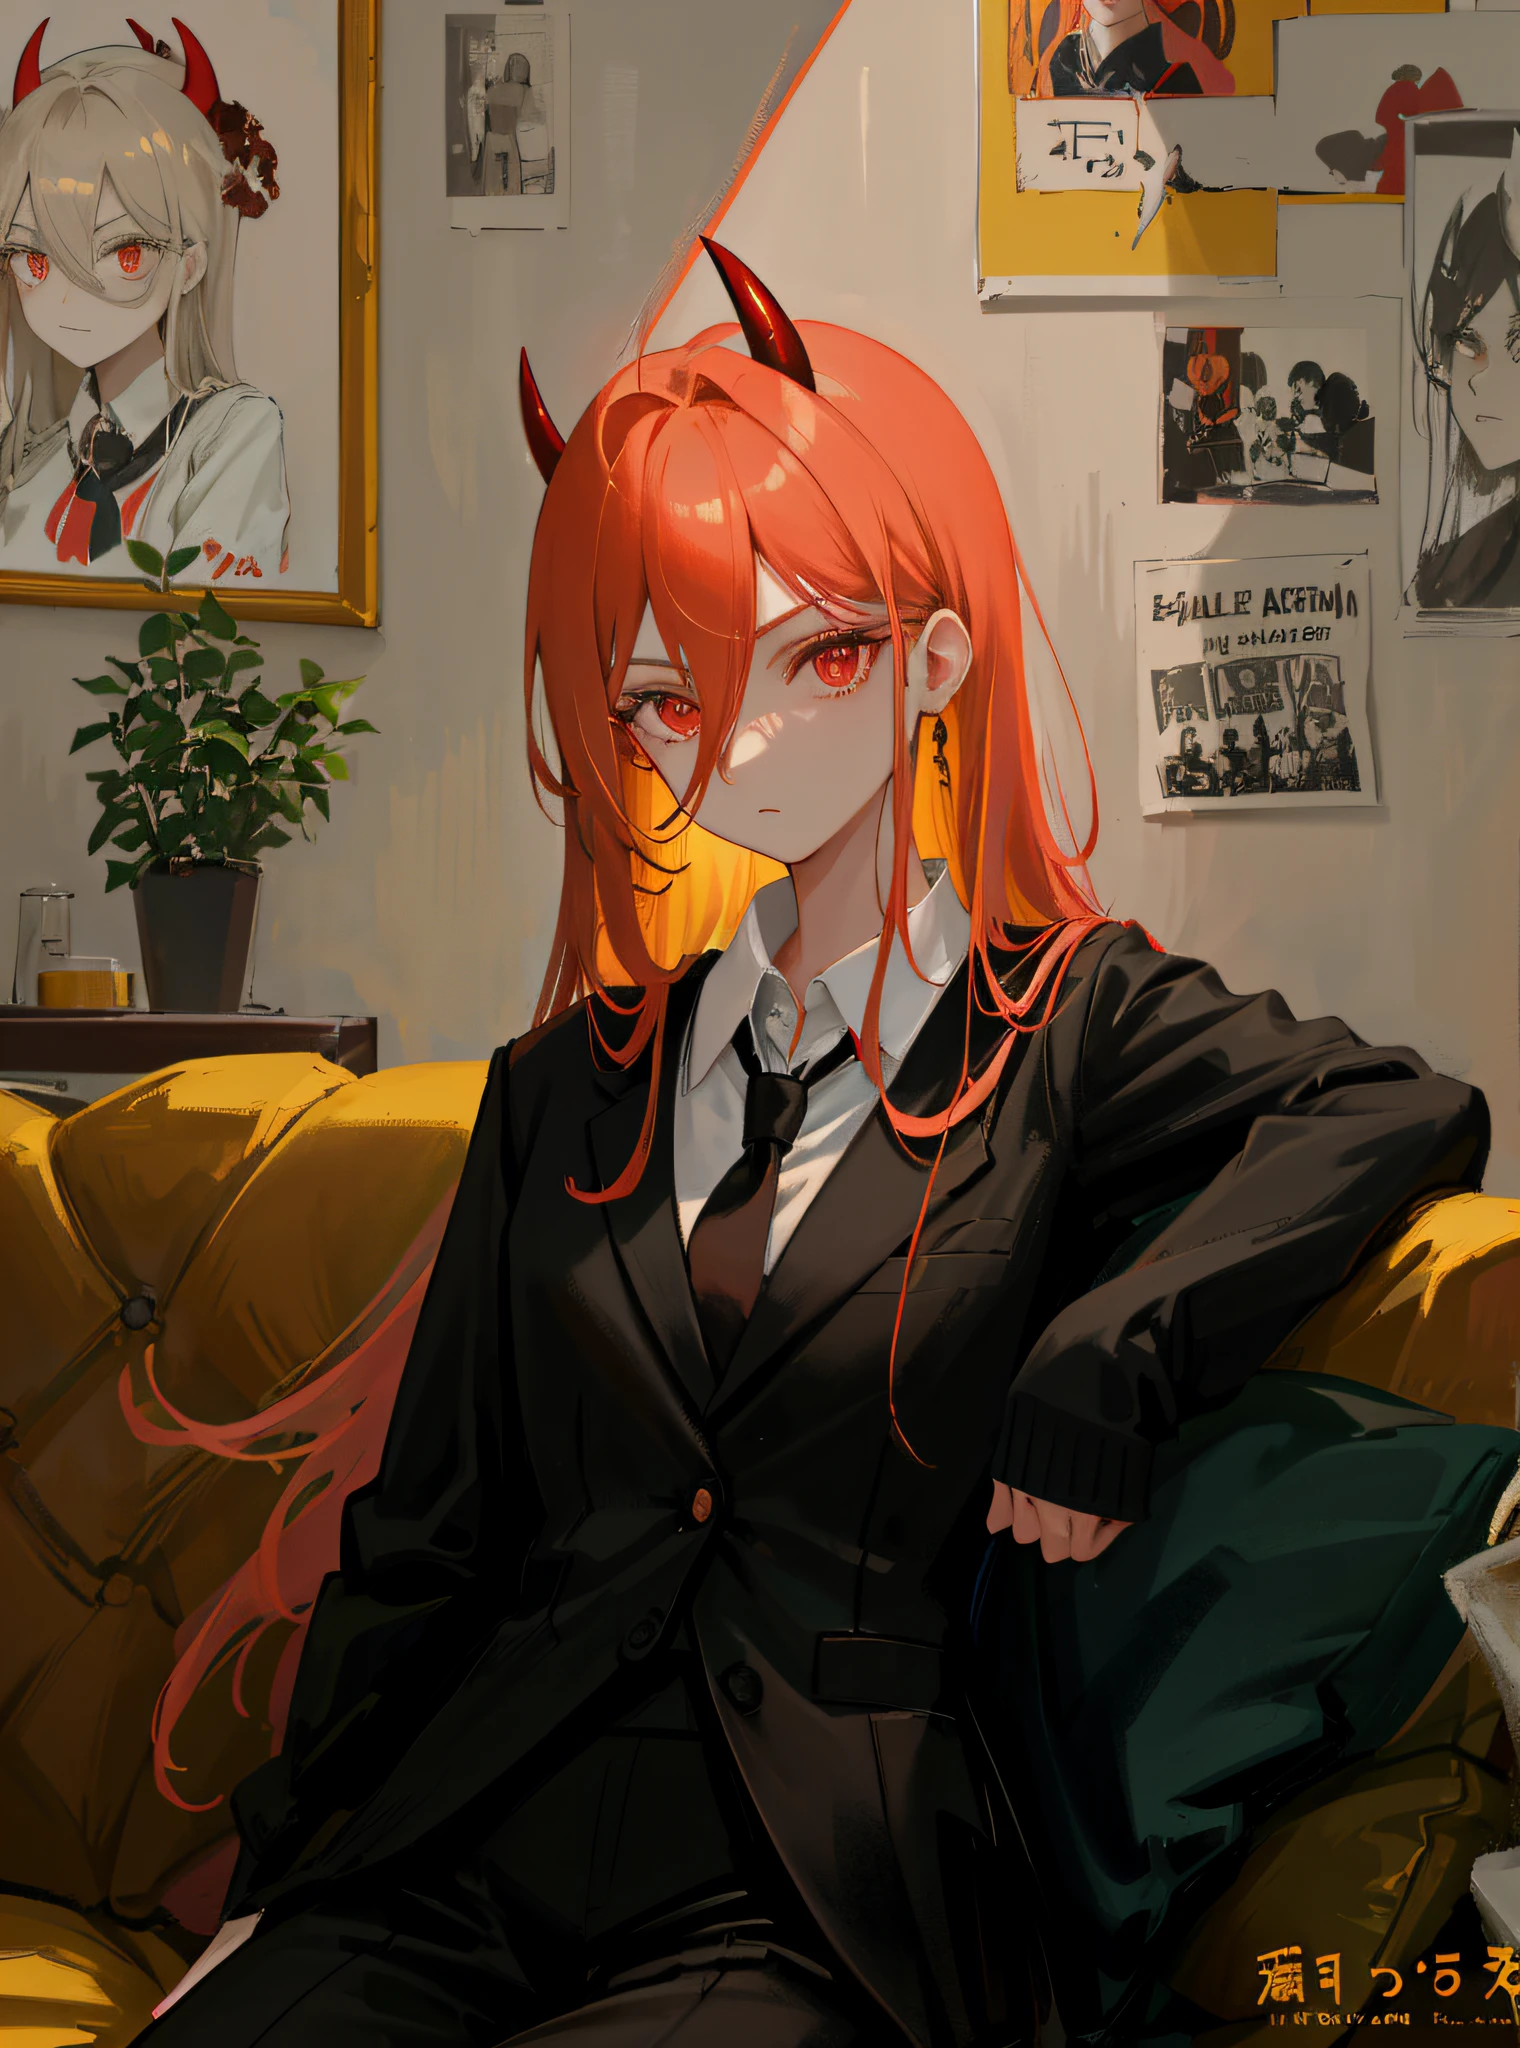 Masterpiece, Best Quality, (1 Girl, Solo Show), Power, White Shirt, Devil Horn, Red Eyes, Black Tie, Black Blazer, More Details, (Light Yellow Long Hair), Black Sweater, Bar, Poster on Wall, Strong Brush Strokes, Sofa